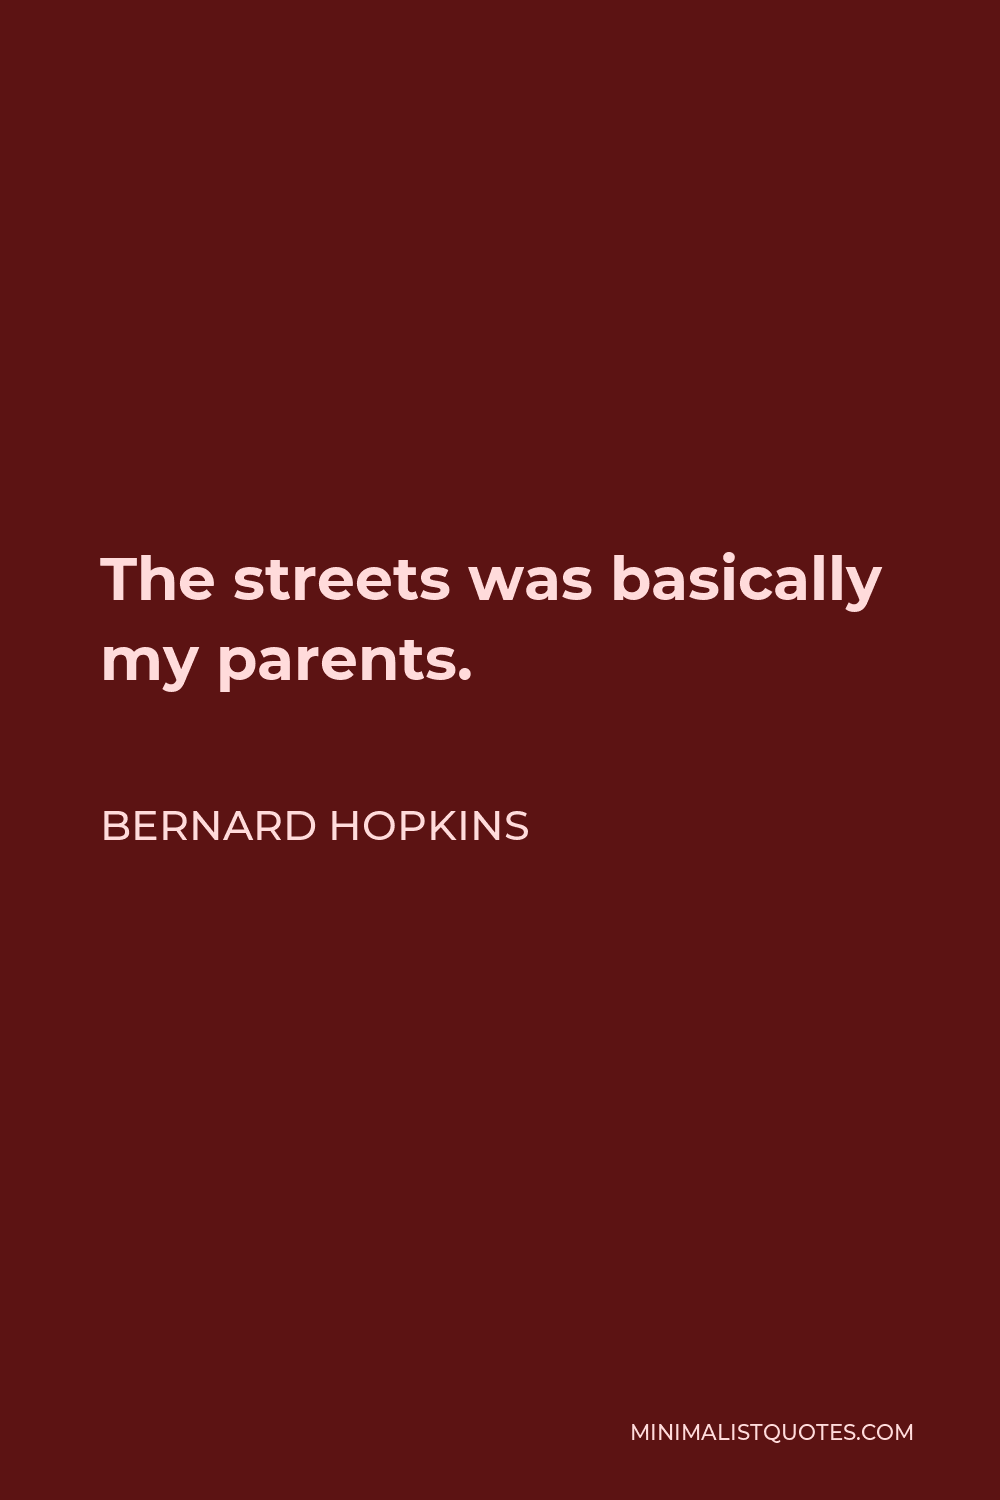 Bernard Hopkins Quote - The streets was basically my parents.